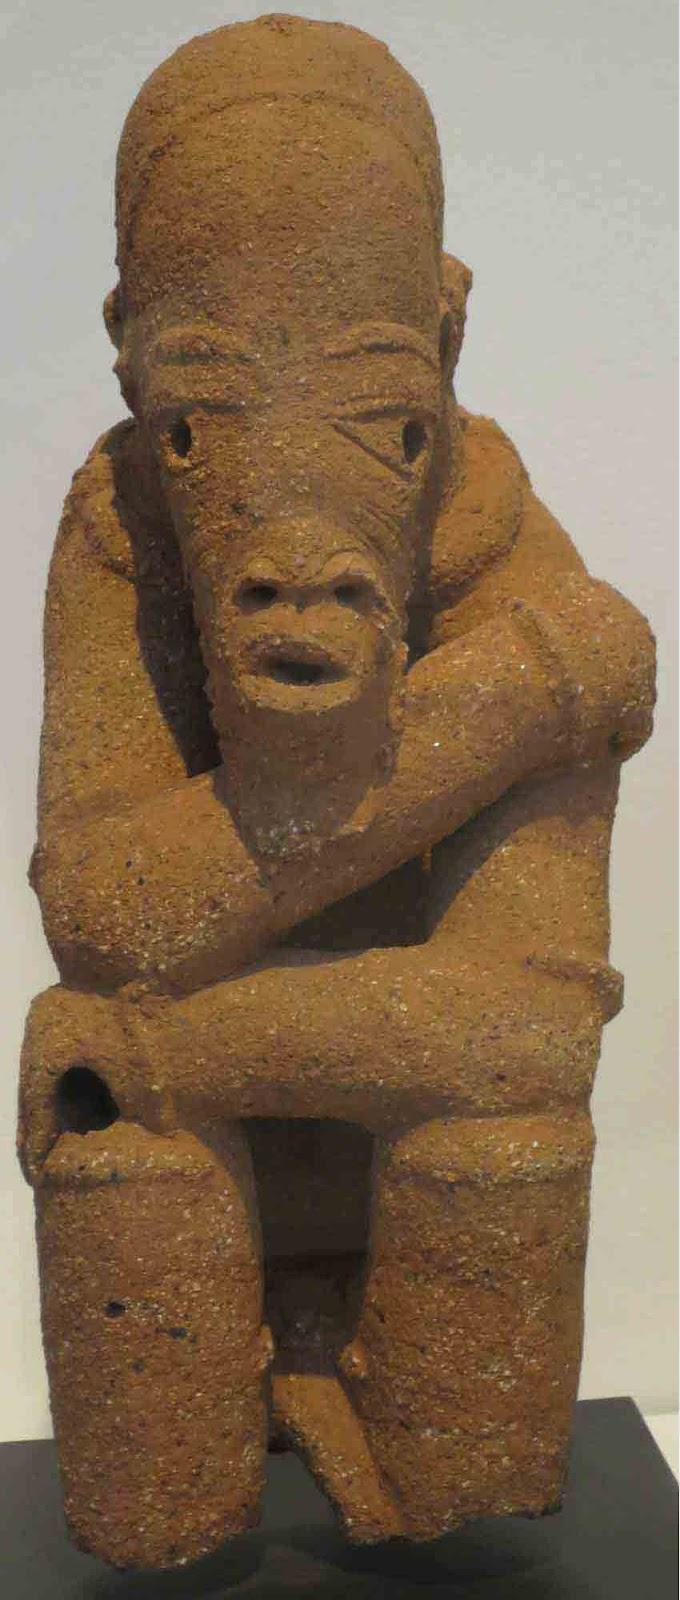 Kneeling figure from the Nok culture. Appears to be made from red sandstone.